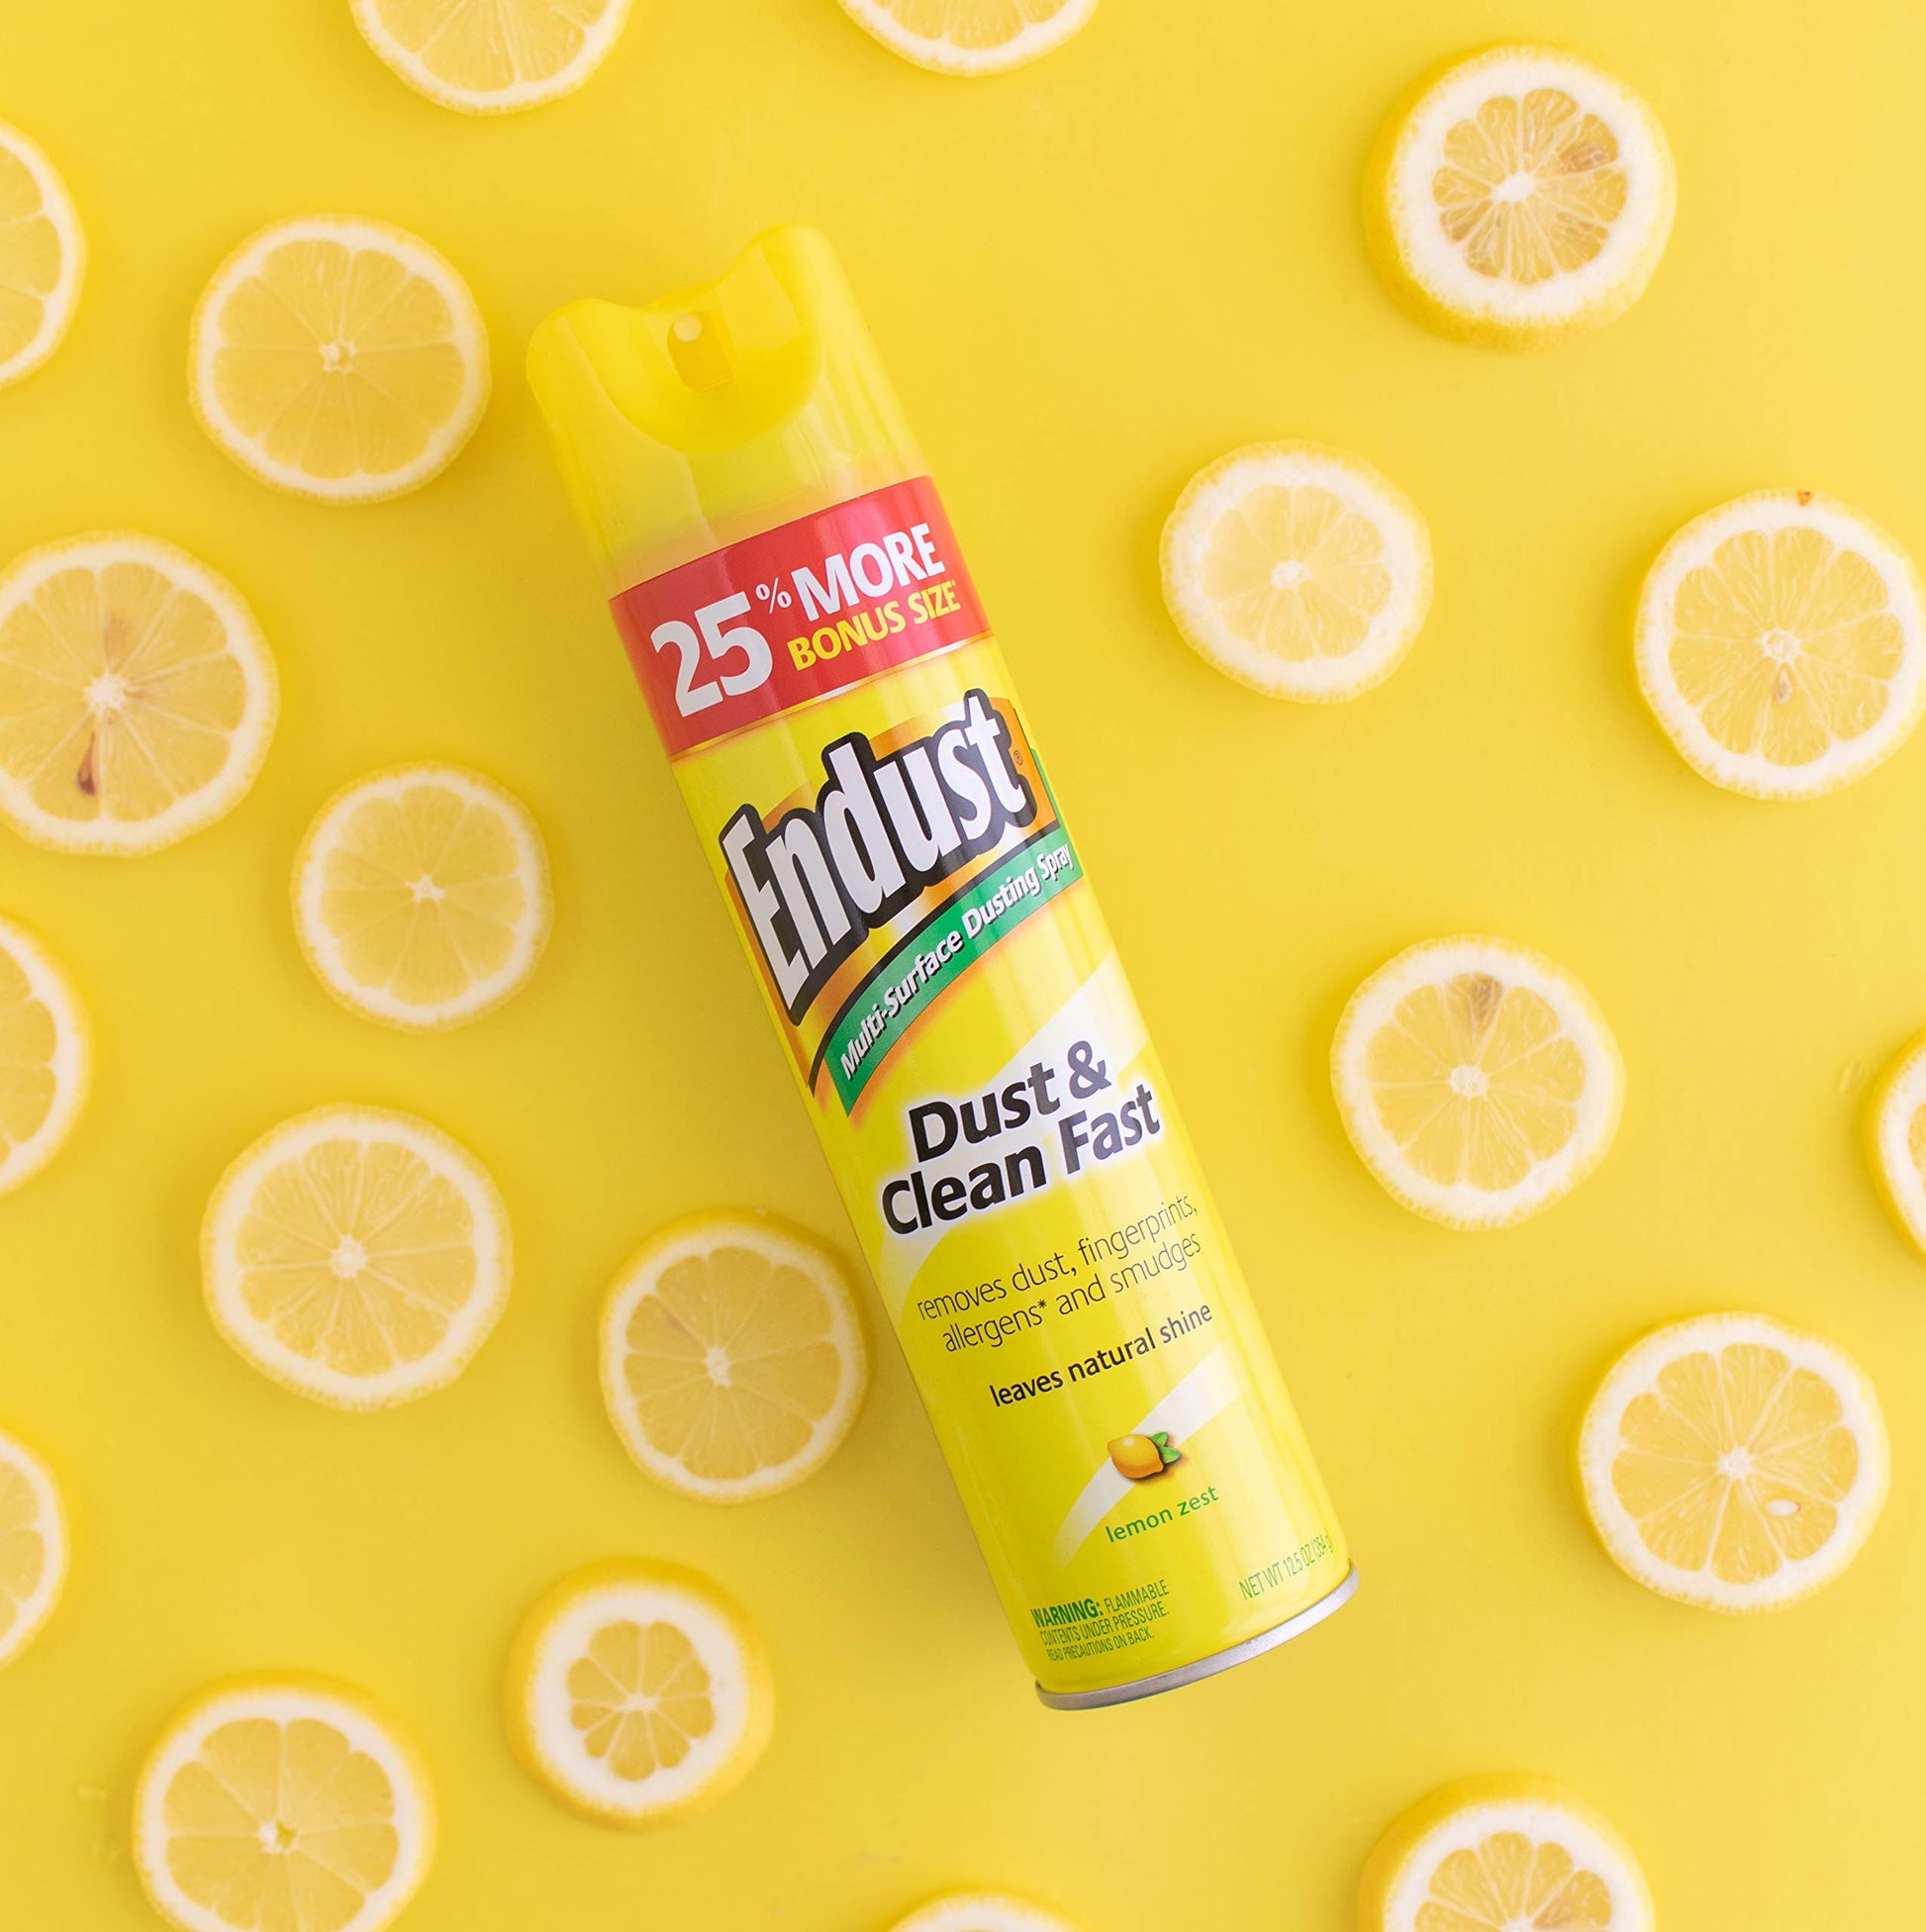 Endust Multi-Surface Dusting and Cleaning Spray, Lemon Zest, 2 Count Endust